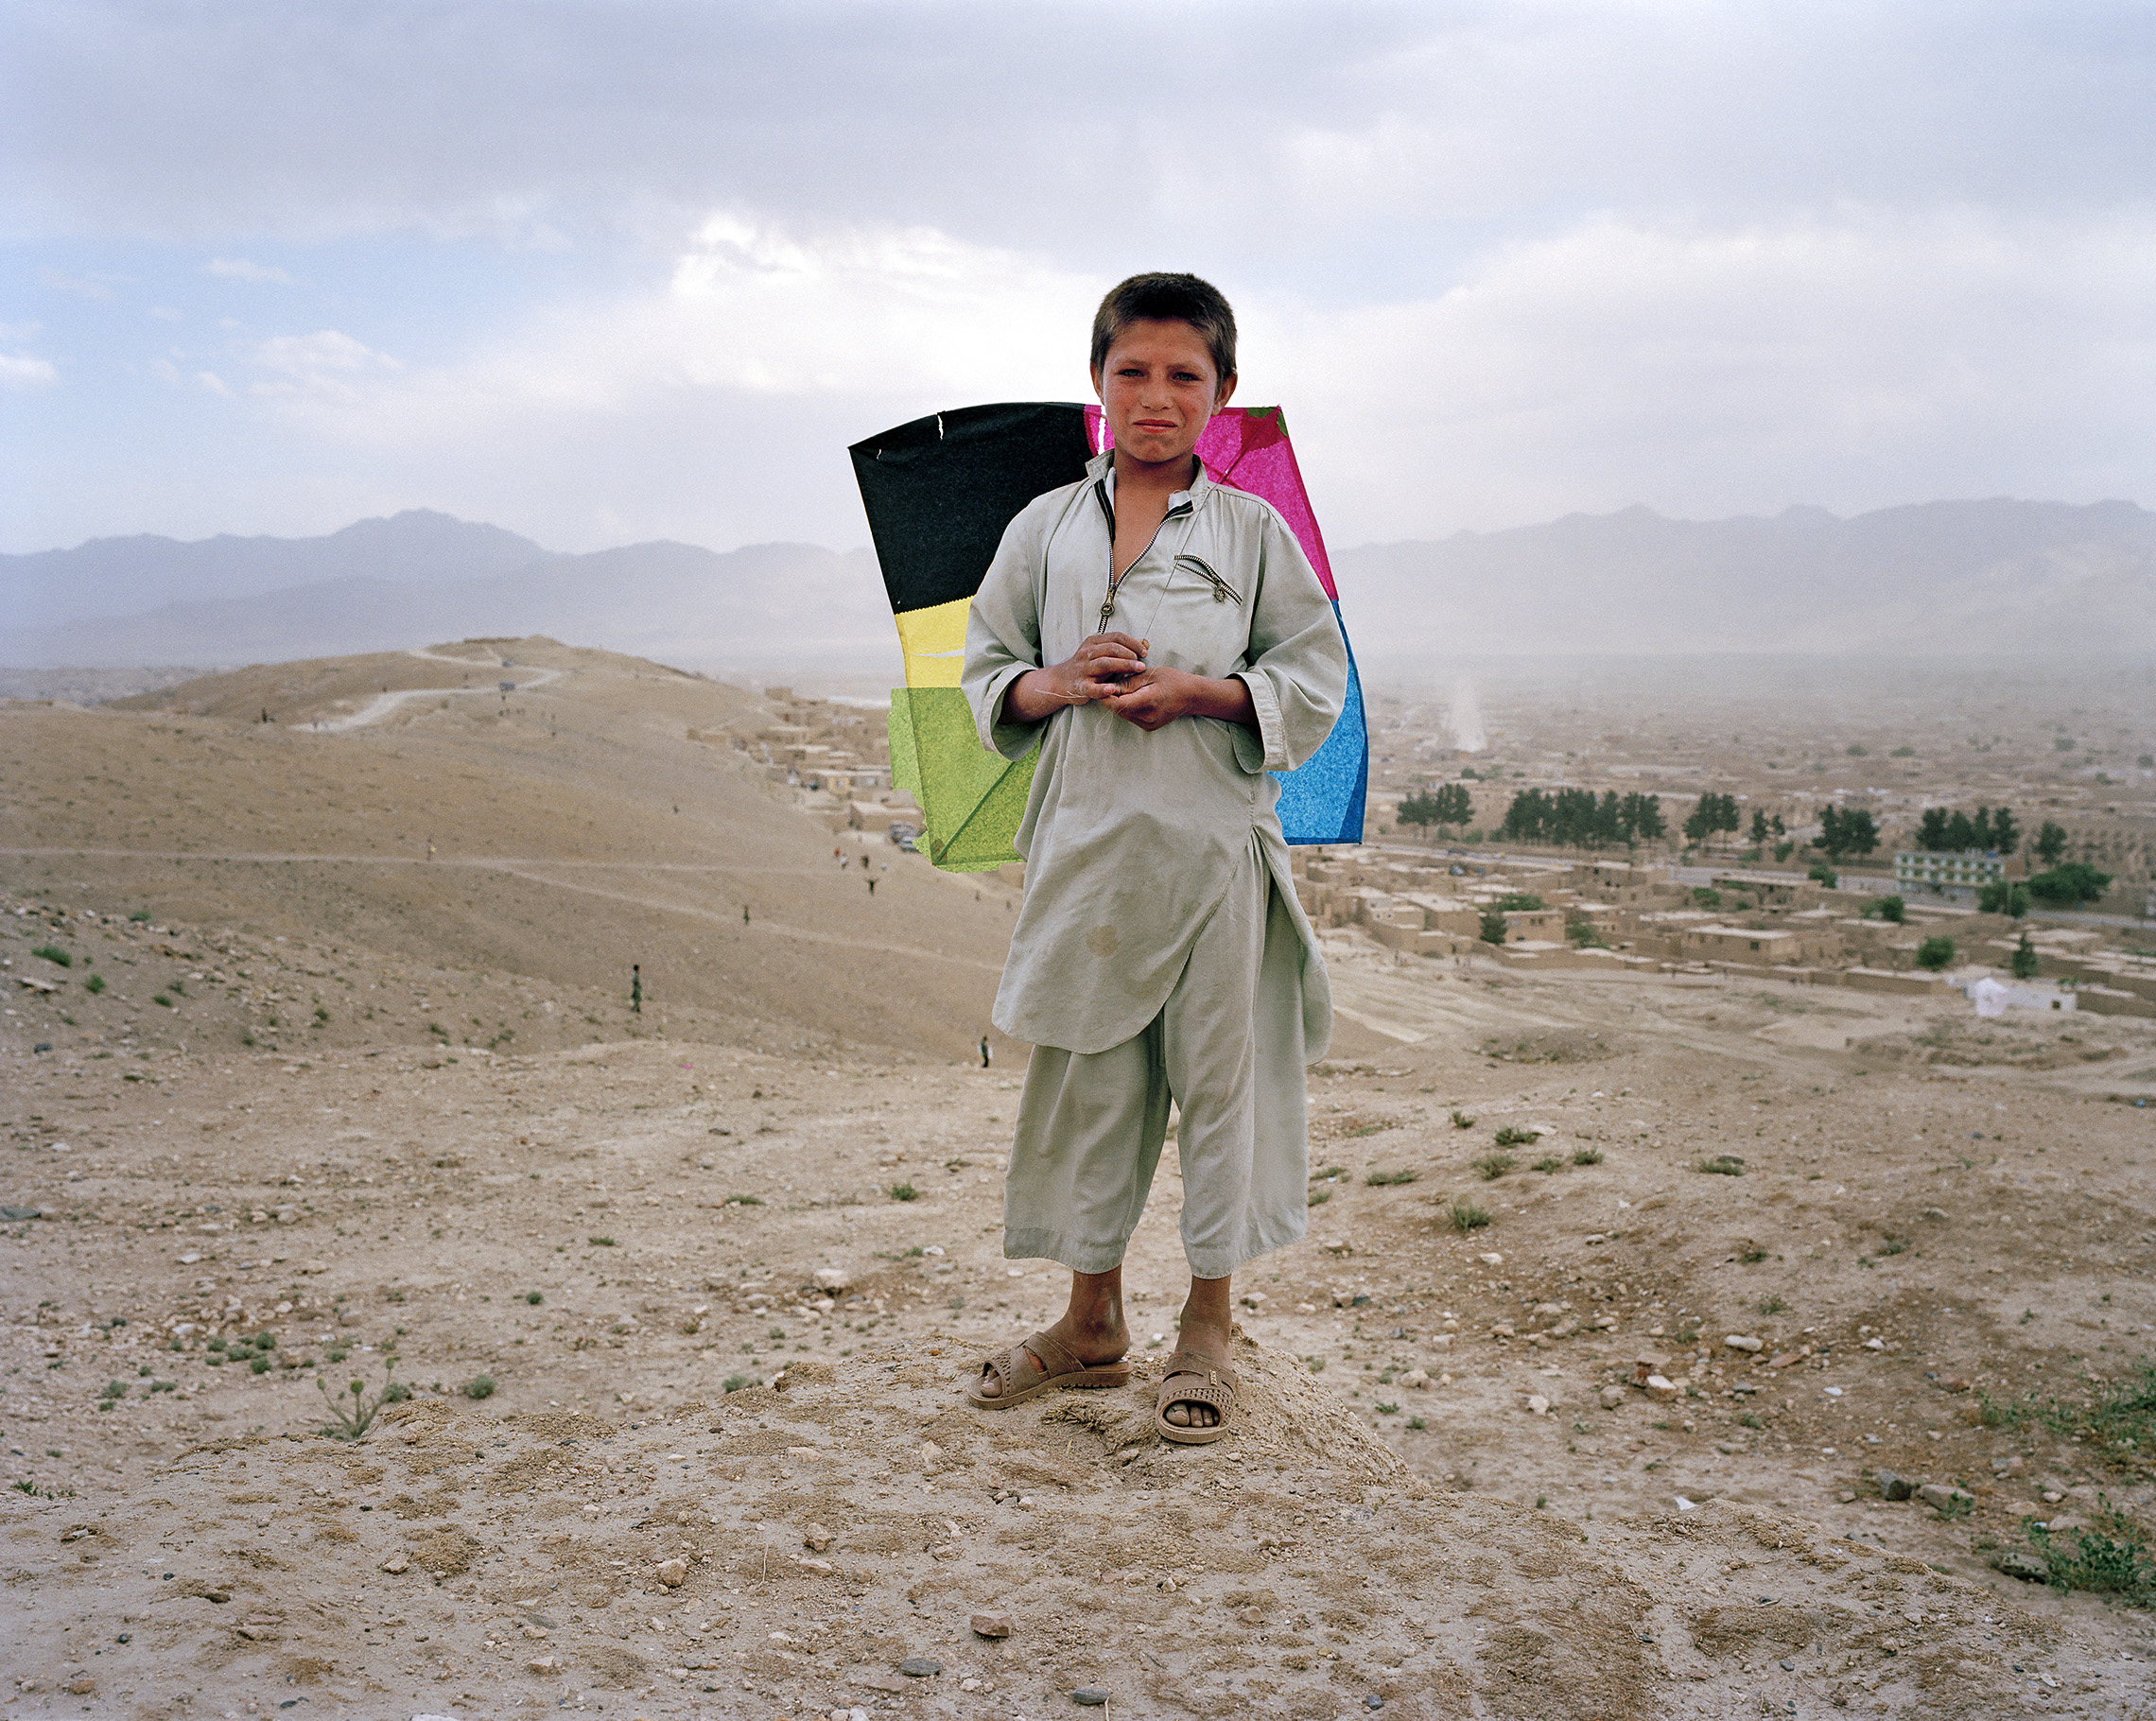 An Afghan boy flies a kite in the hills overlooking Kabul. Kite flying, the traditional sport of Afghan children, was banned under the fundamentalist Taliban regime, along with dancing, music, and a host of other activities. Reports of the kite flying ban inspired Khaled Hosseini to write his celebrated novel, The Kite Runner. Kites reappeared immediately when the Taliban was driven from Kabul. (© James Reeve/Corbis)